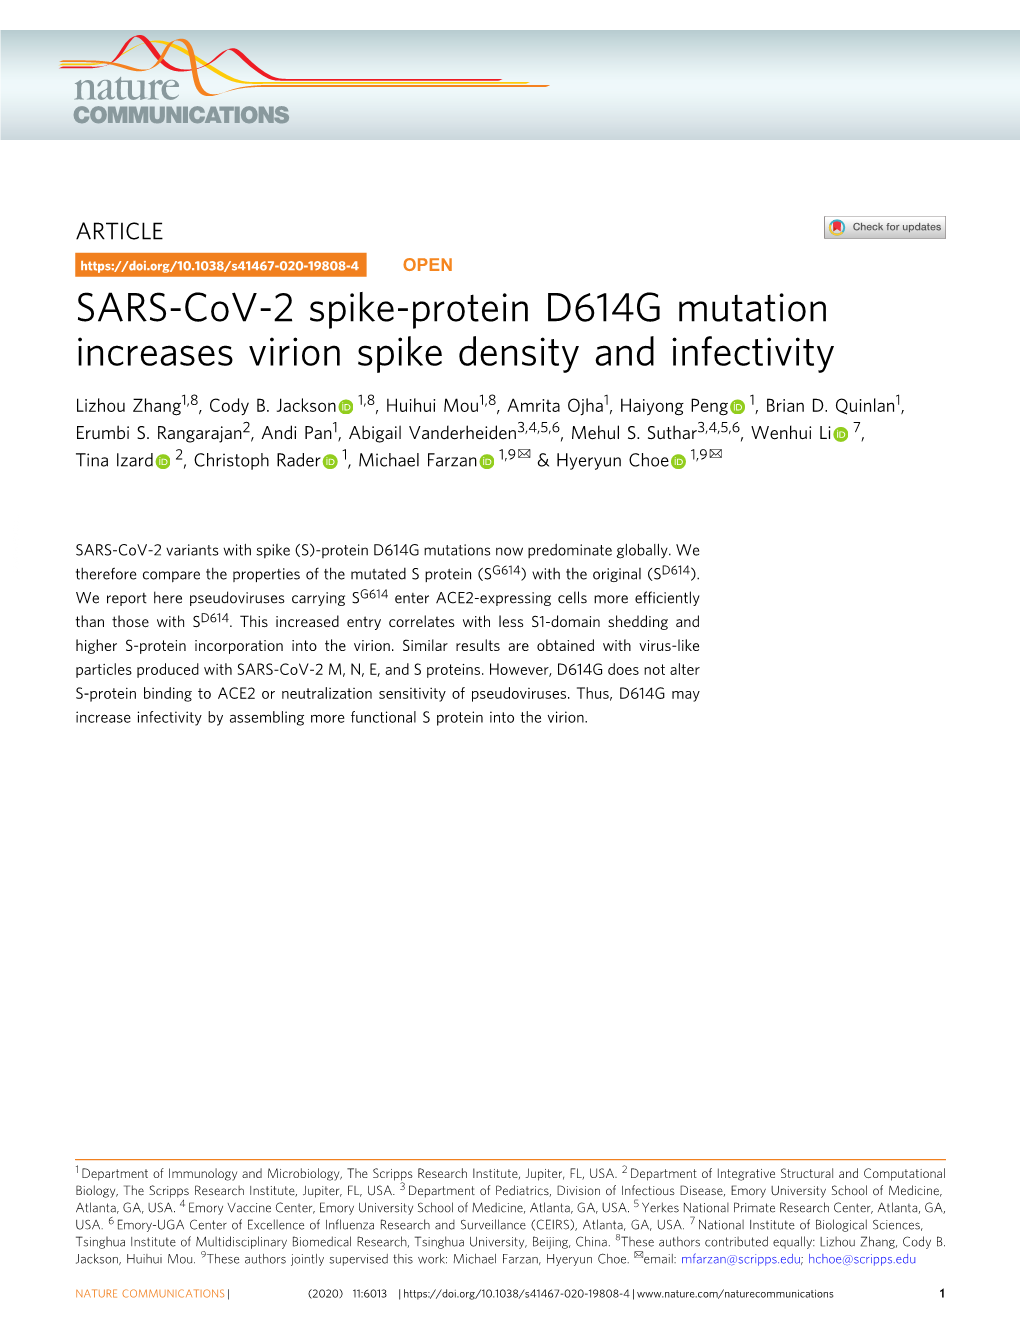 SARS-Cov-2 Spike-Protein D614G Mutation Increases Virion Spike Density and Infectivity